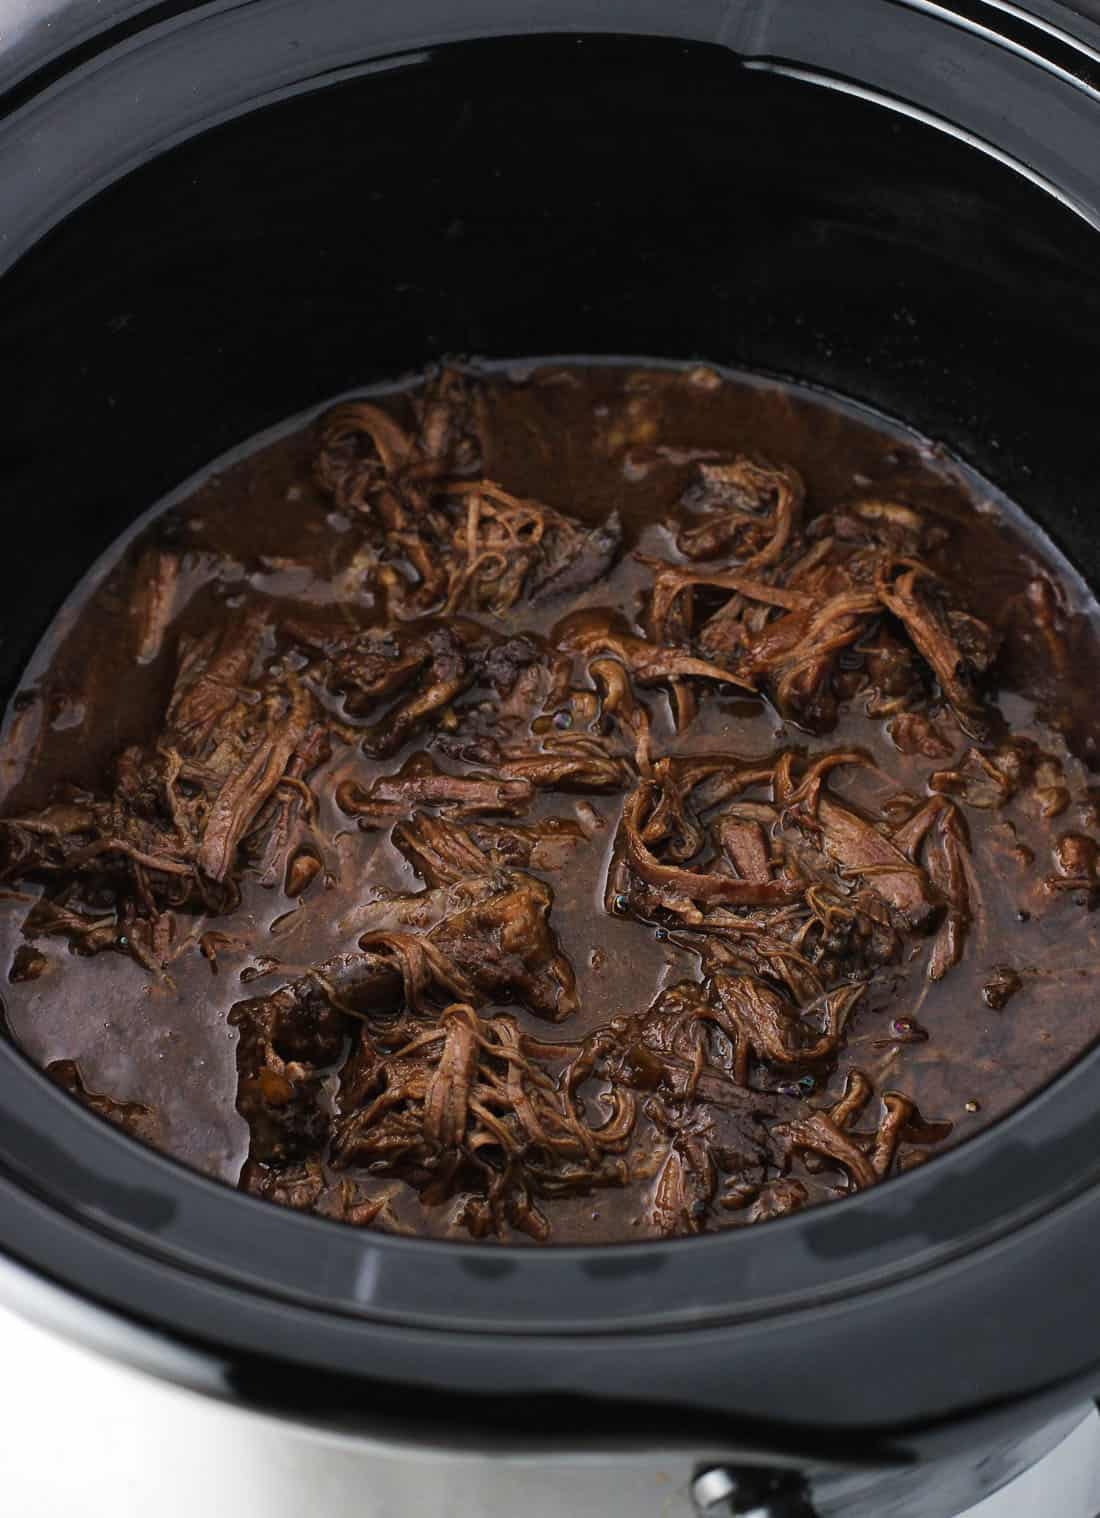 The beef shredded in sauce in the slow cooker after cooking